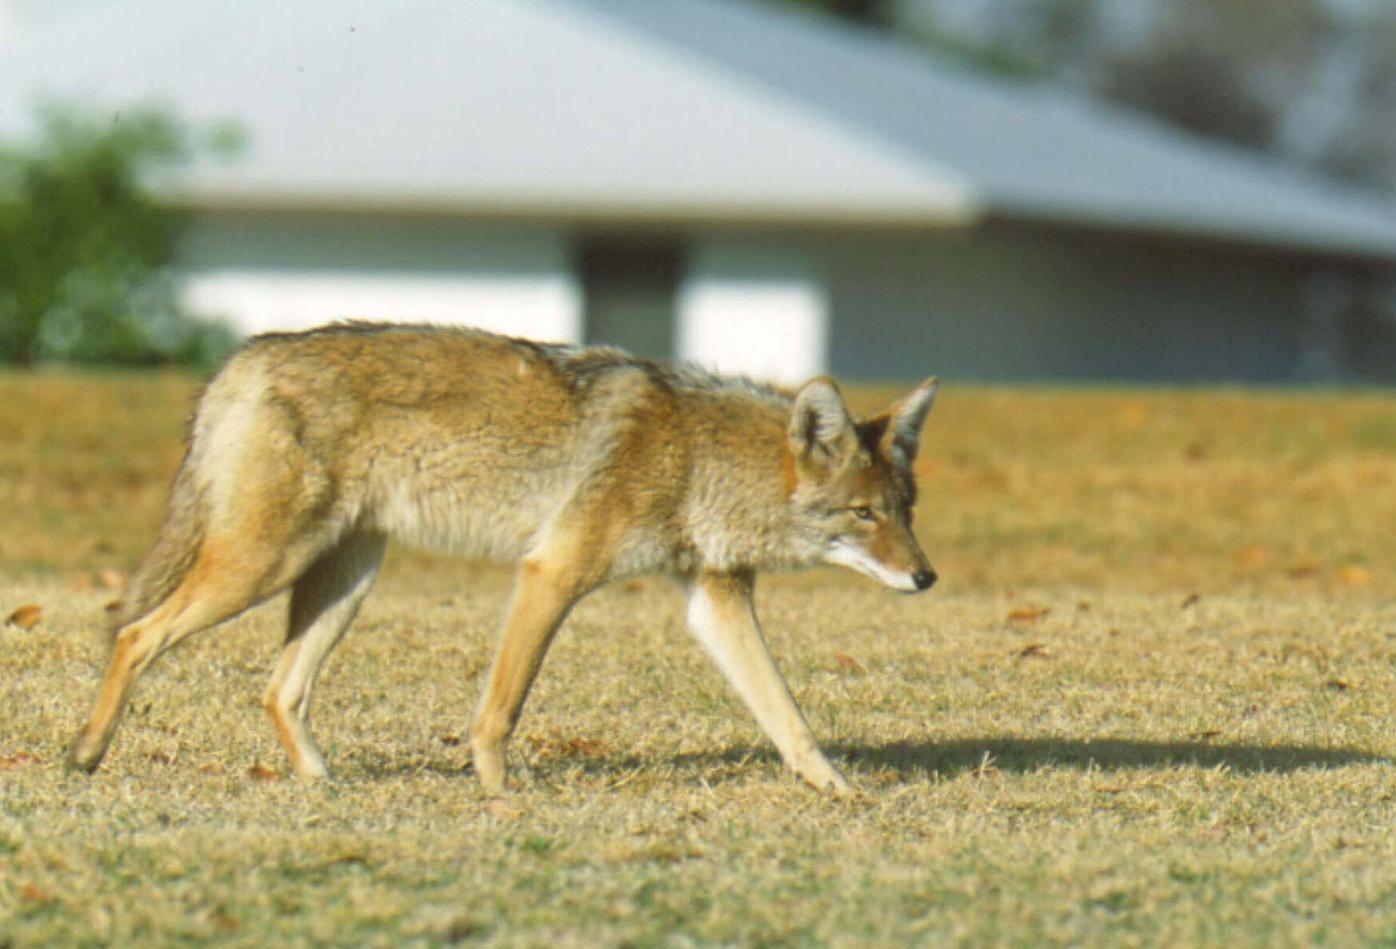 Why are we seeing more coyotes in the Phoenix area? Wildlife